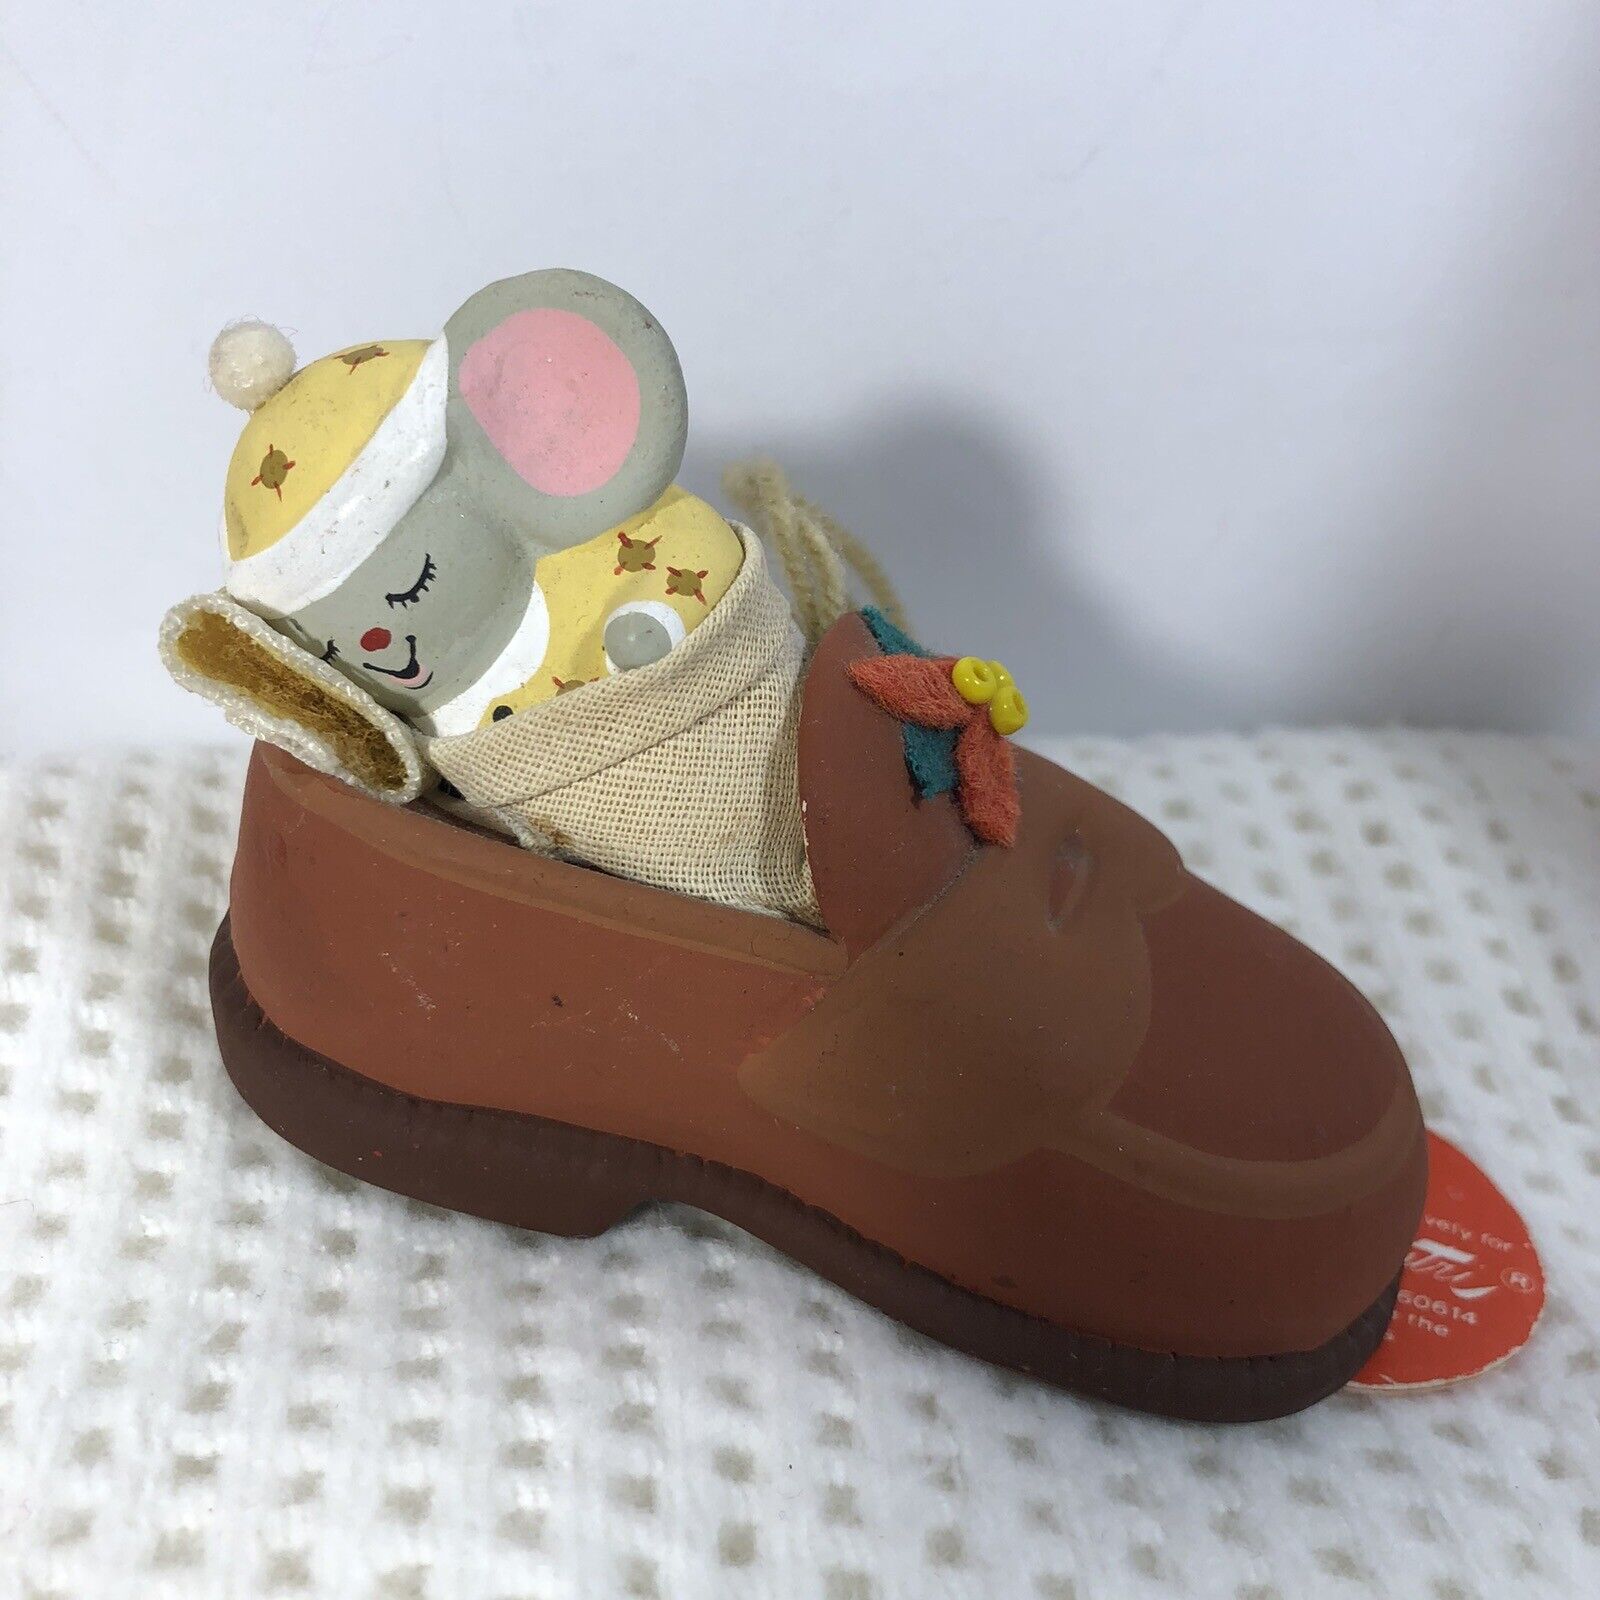 Vintage Silvestri Mouse Christmas Ornament Unusual Mouse In A Penny Loafer Shoe